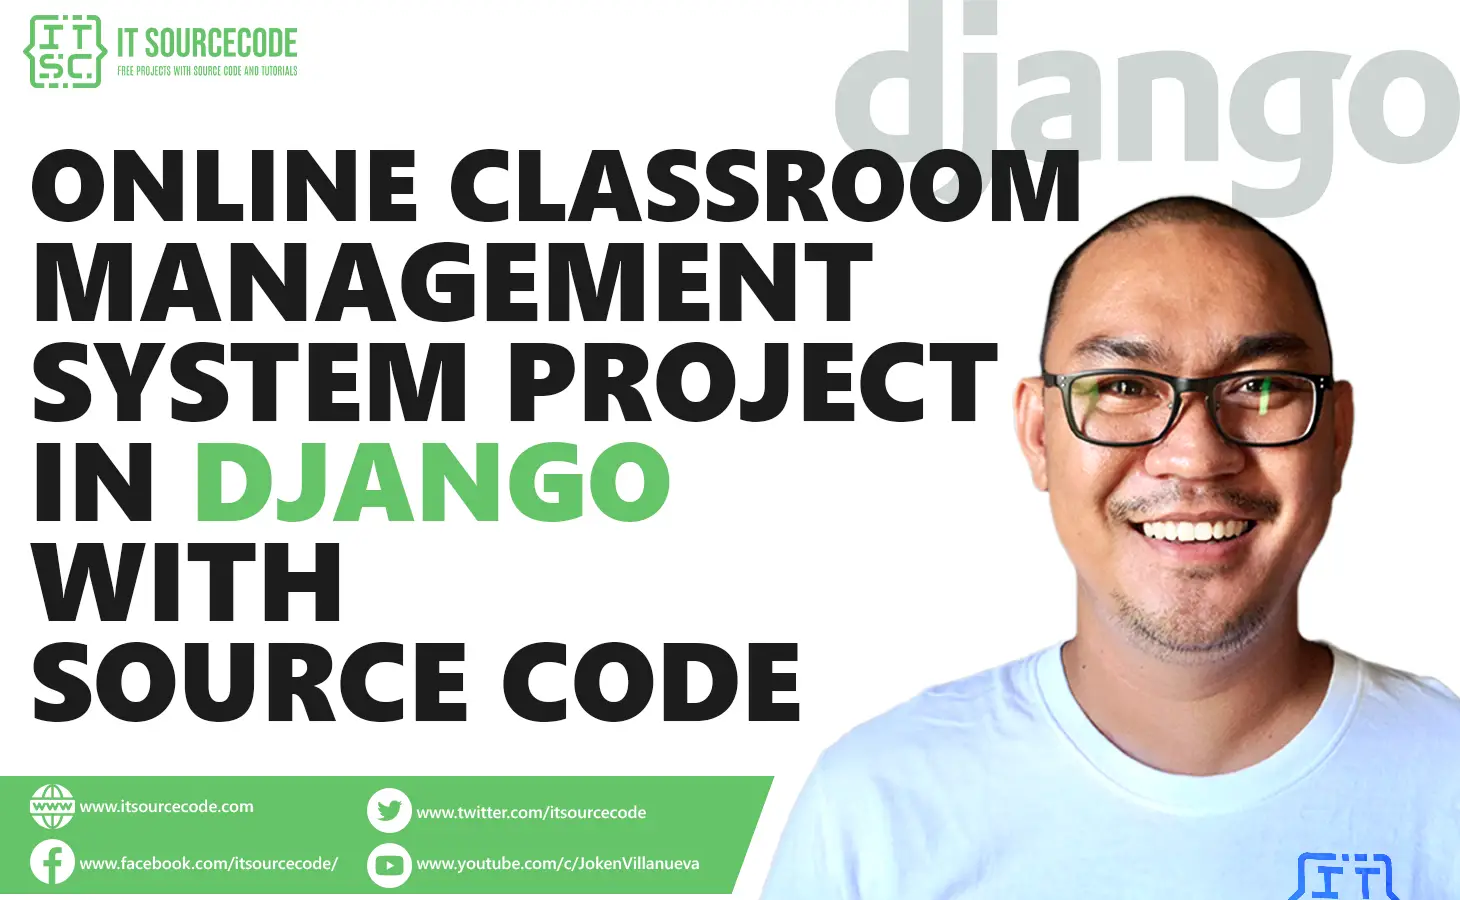 Online Classroom Management System Project in Django with Source Code